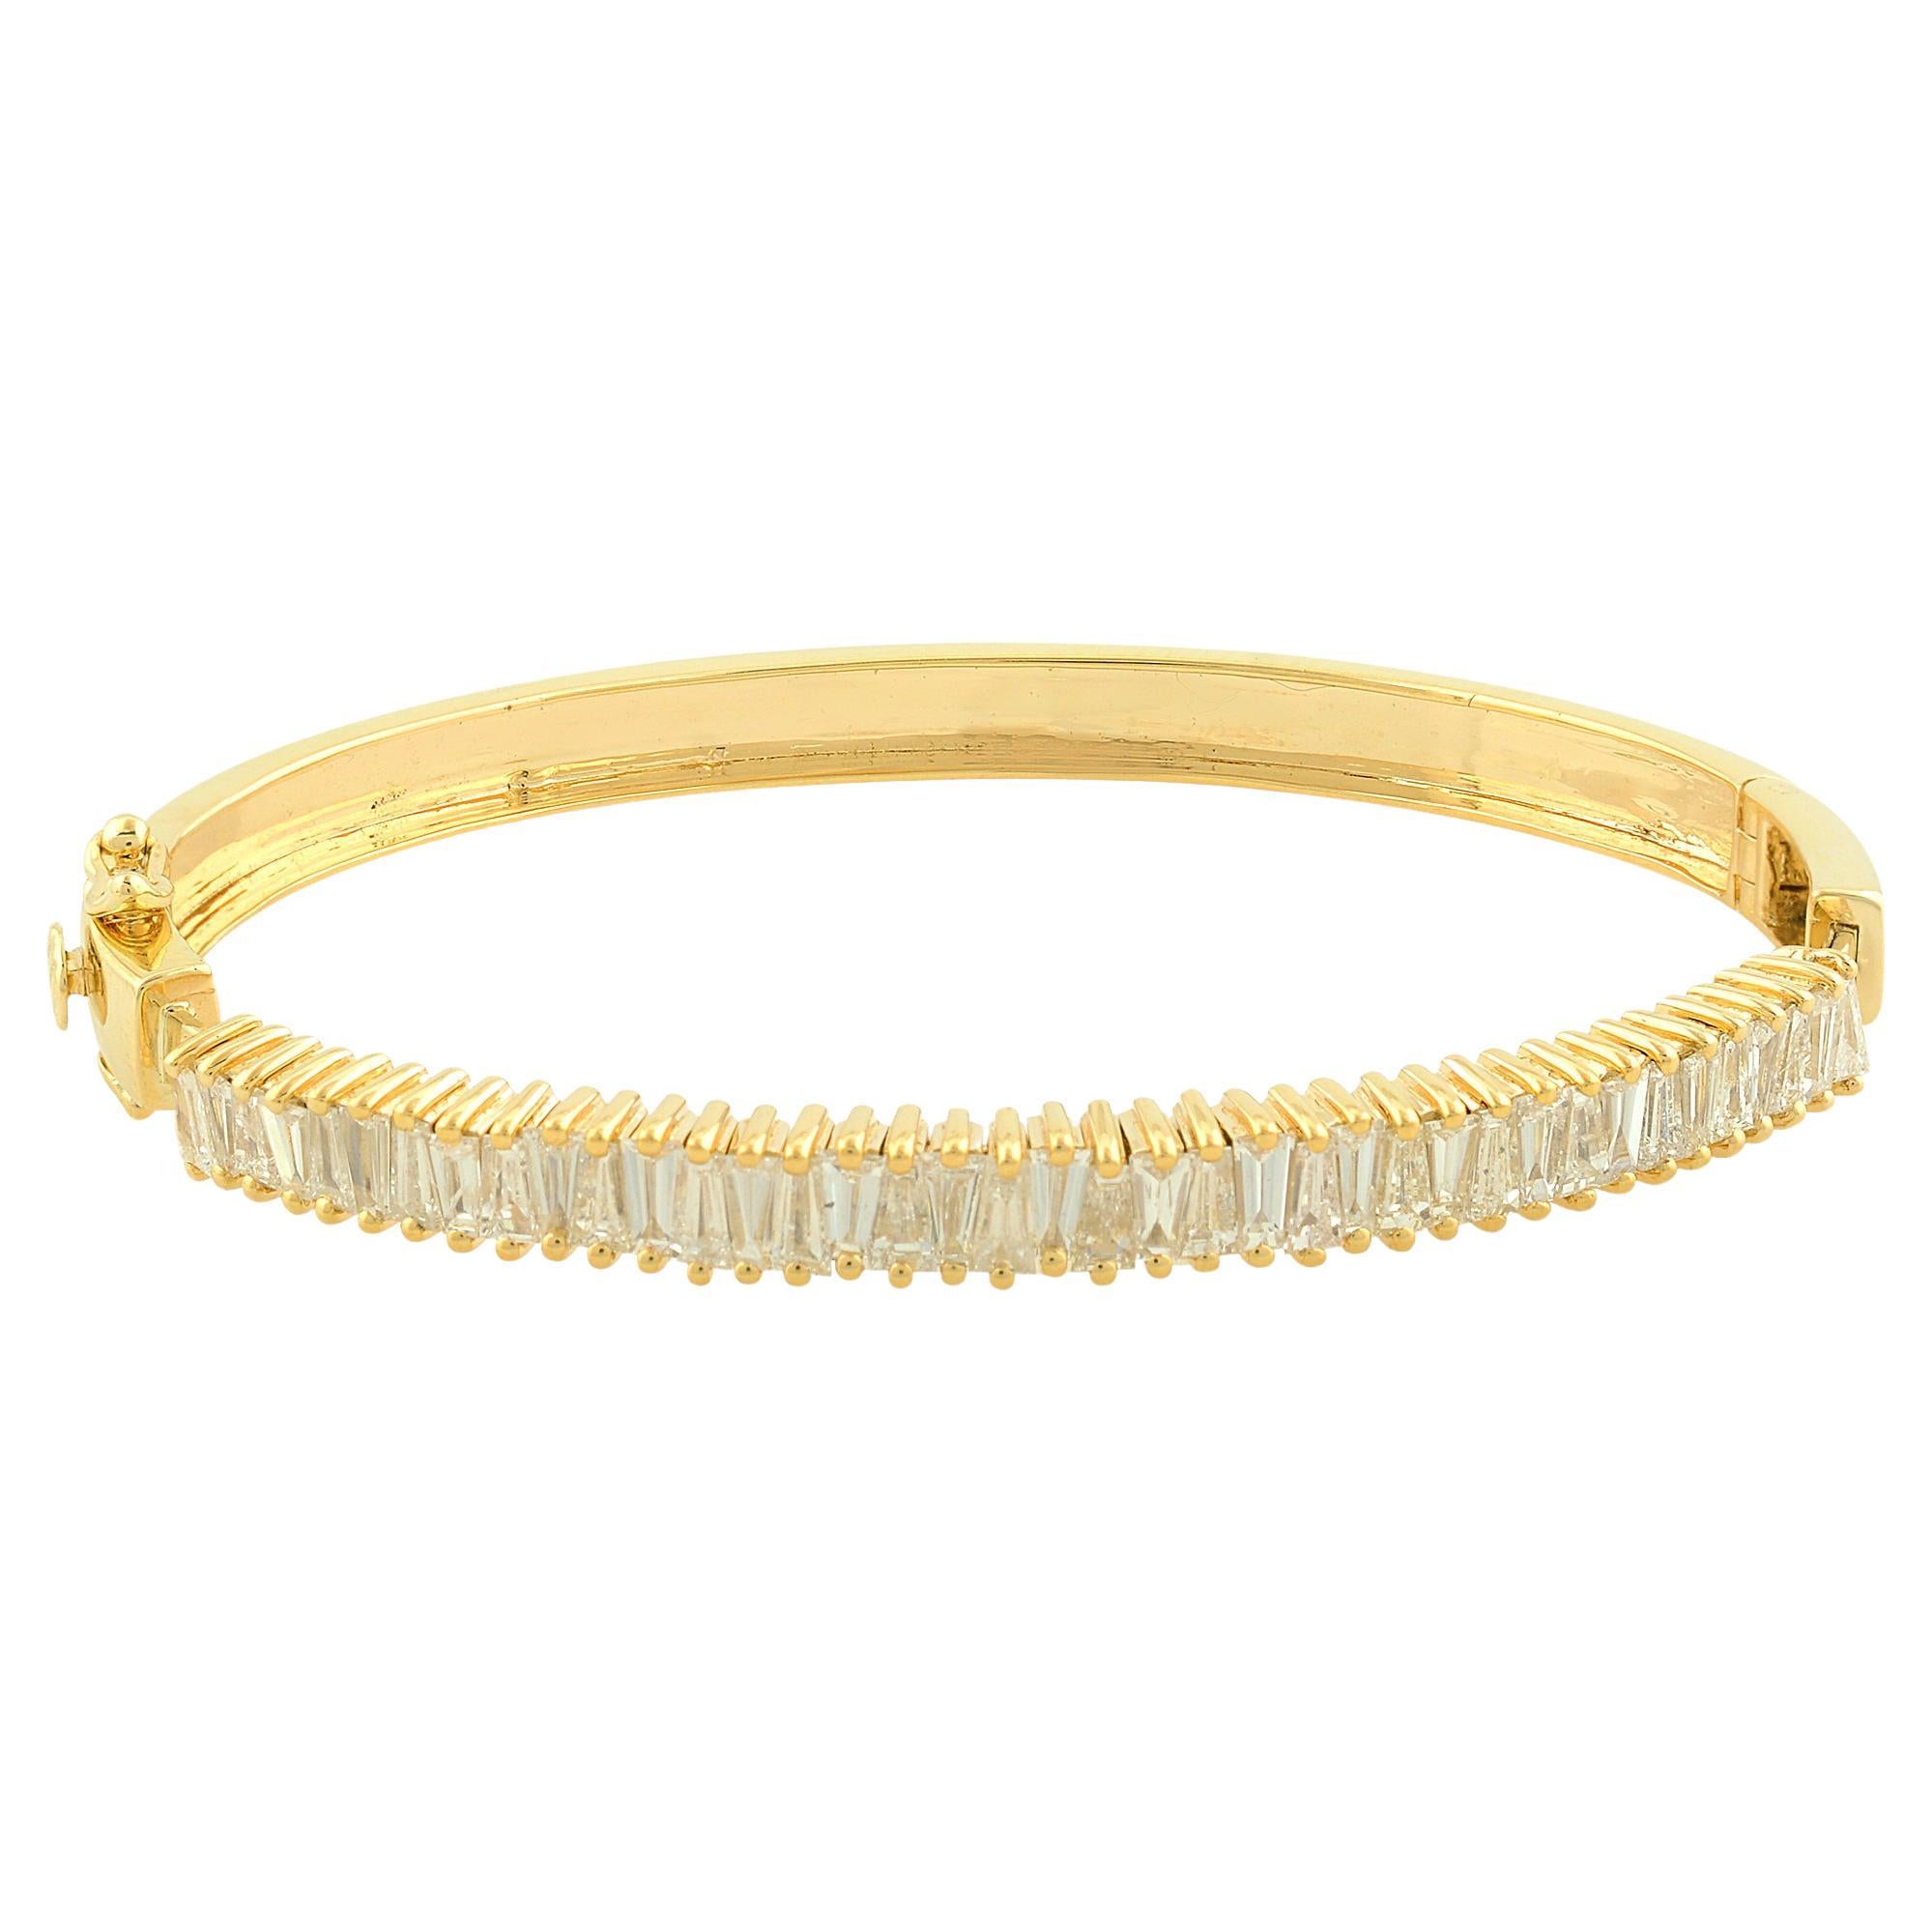 Natural Tapered Baguette Diamond Bangle Bracelet 14 Karat Yellow Gold Jewelry For Sale